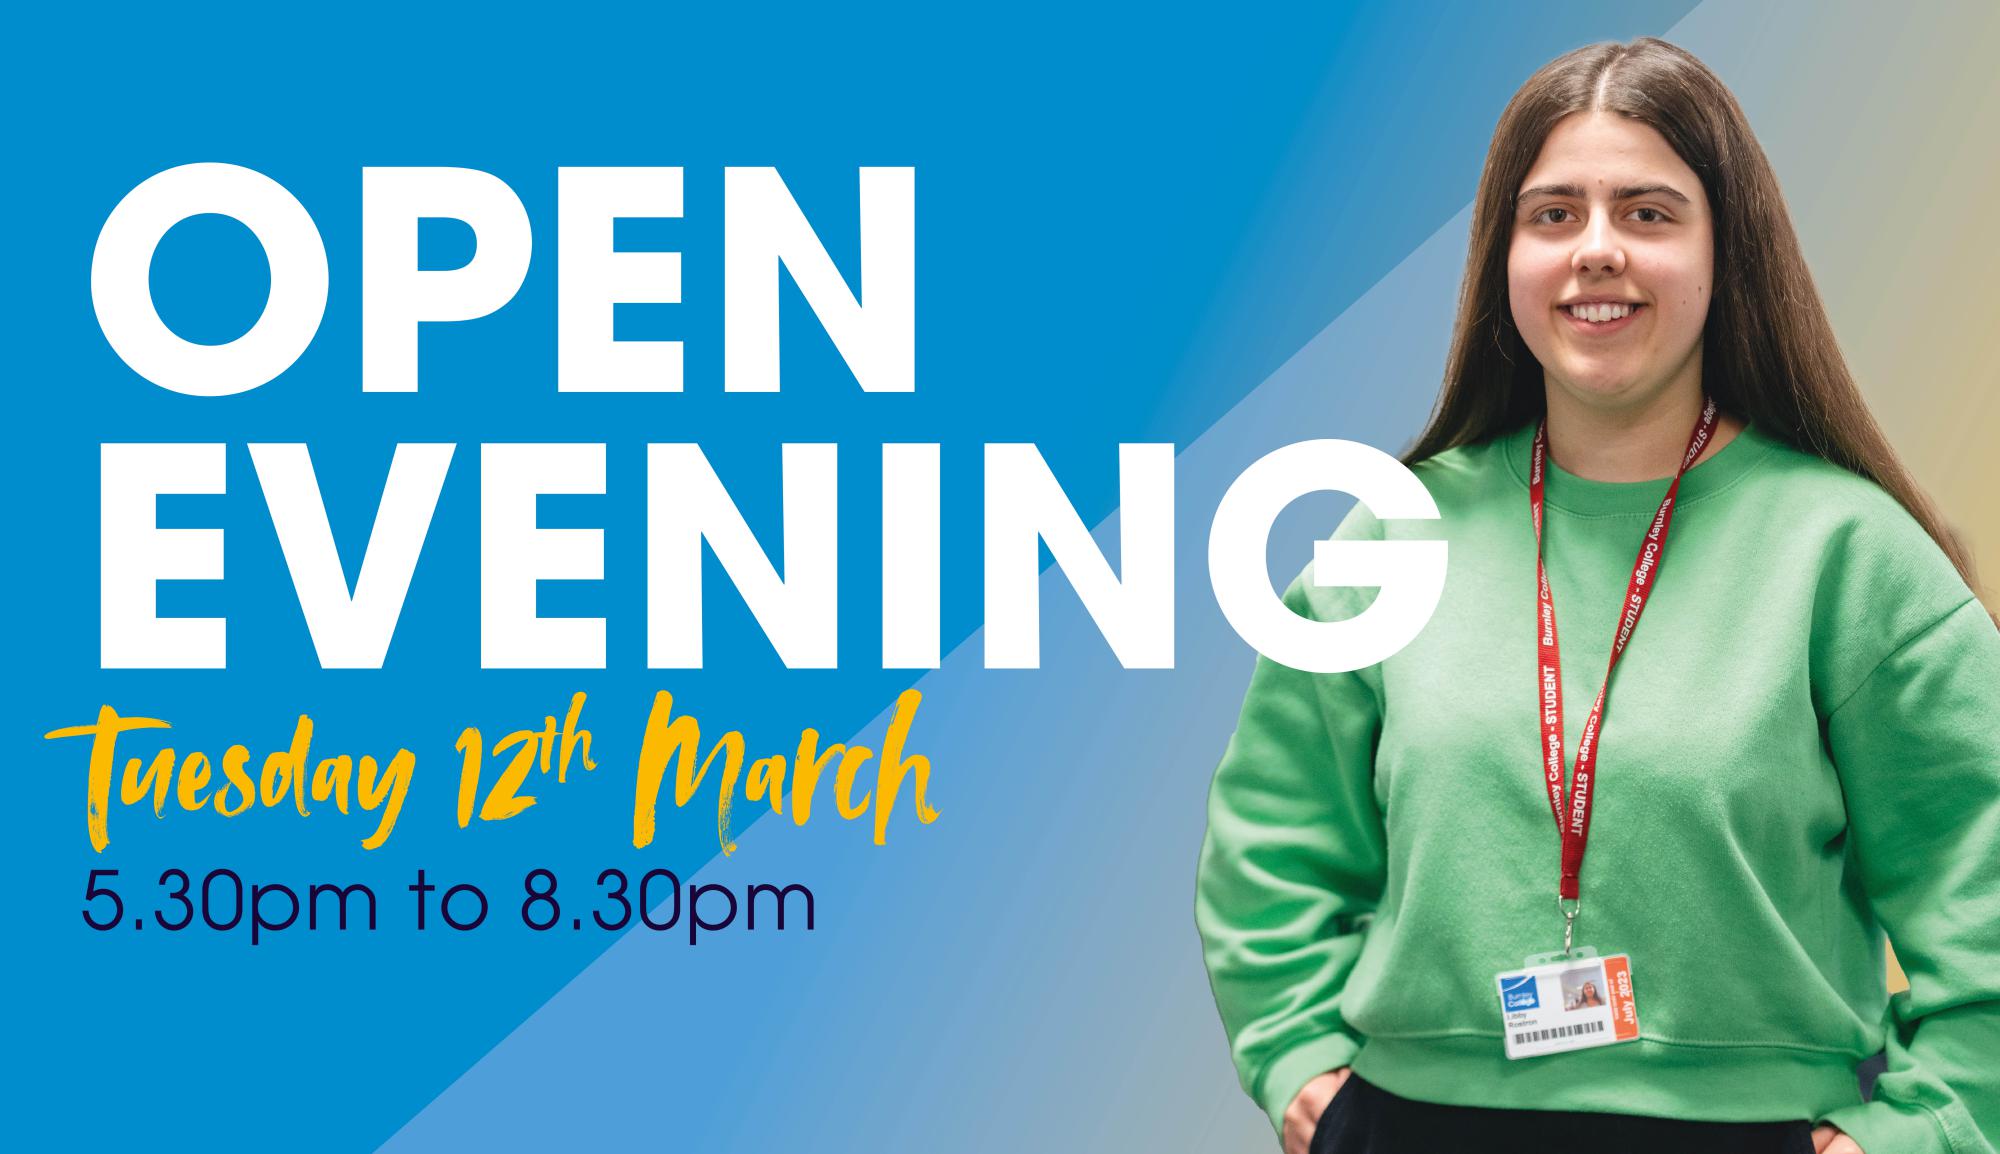 Burnley College Sixth Form Centre Open Evening